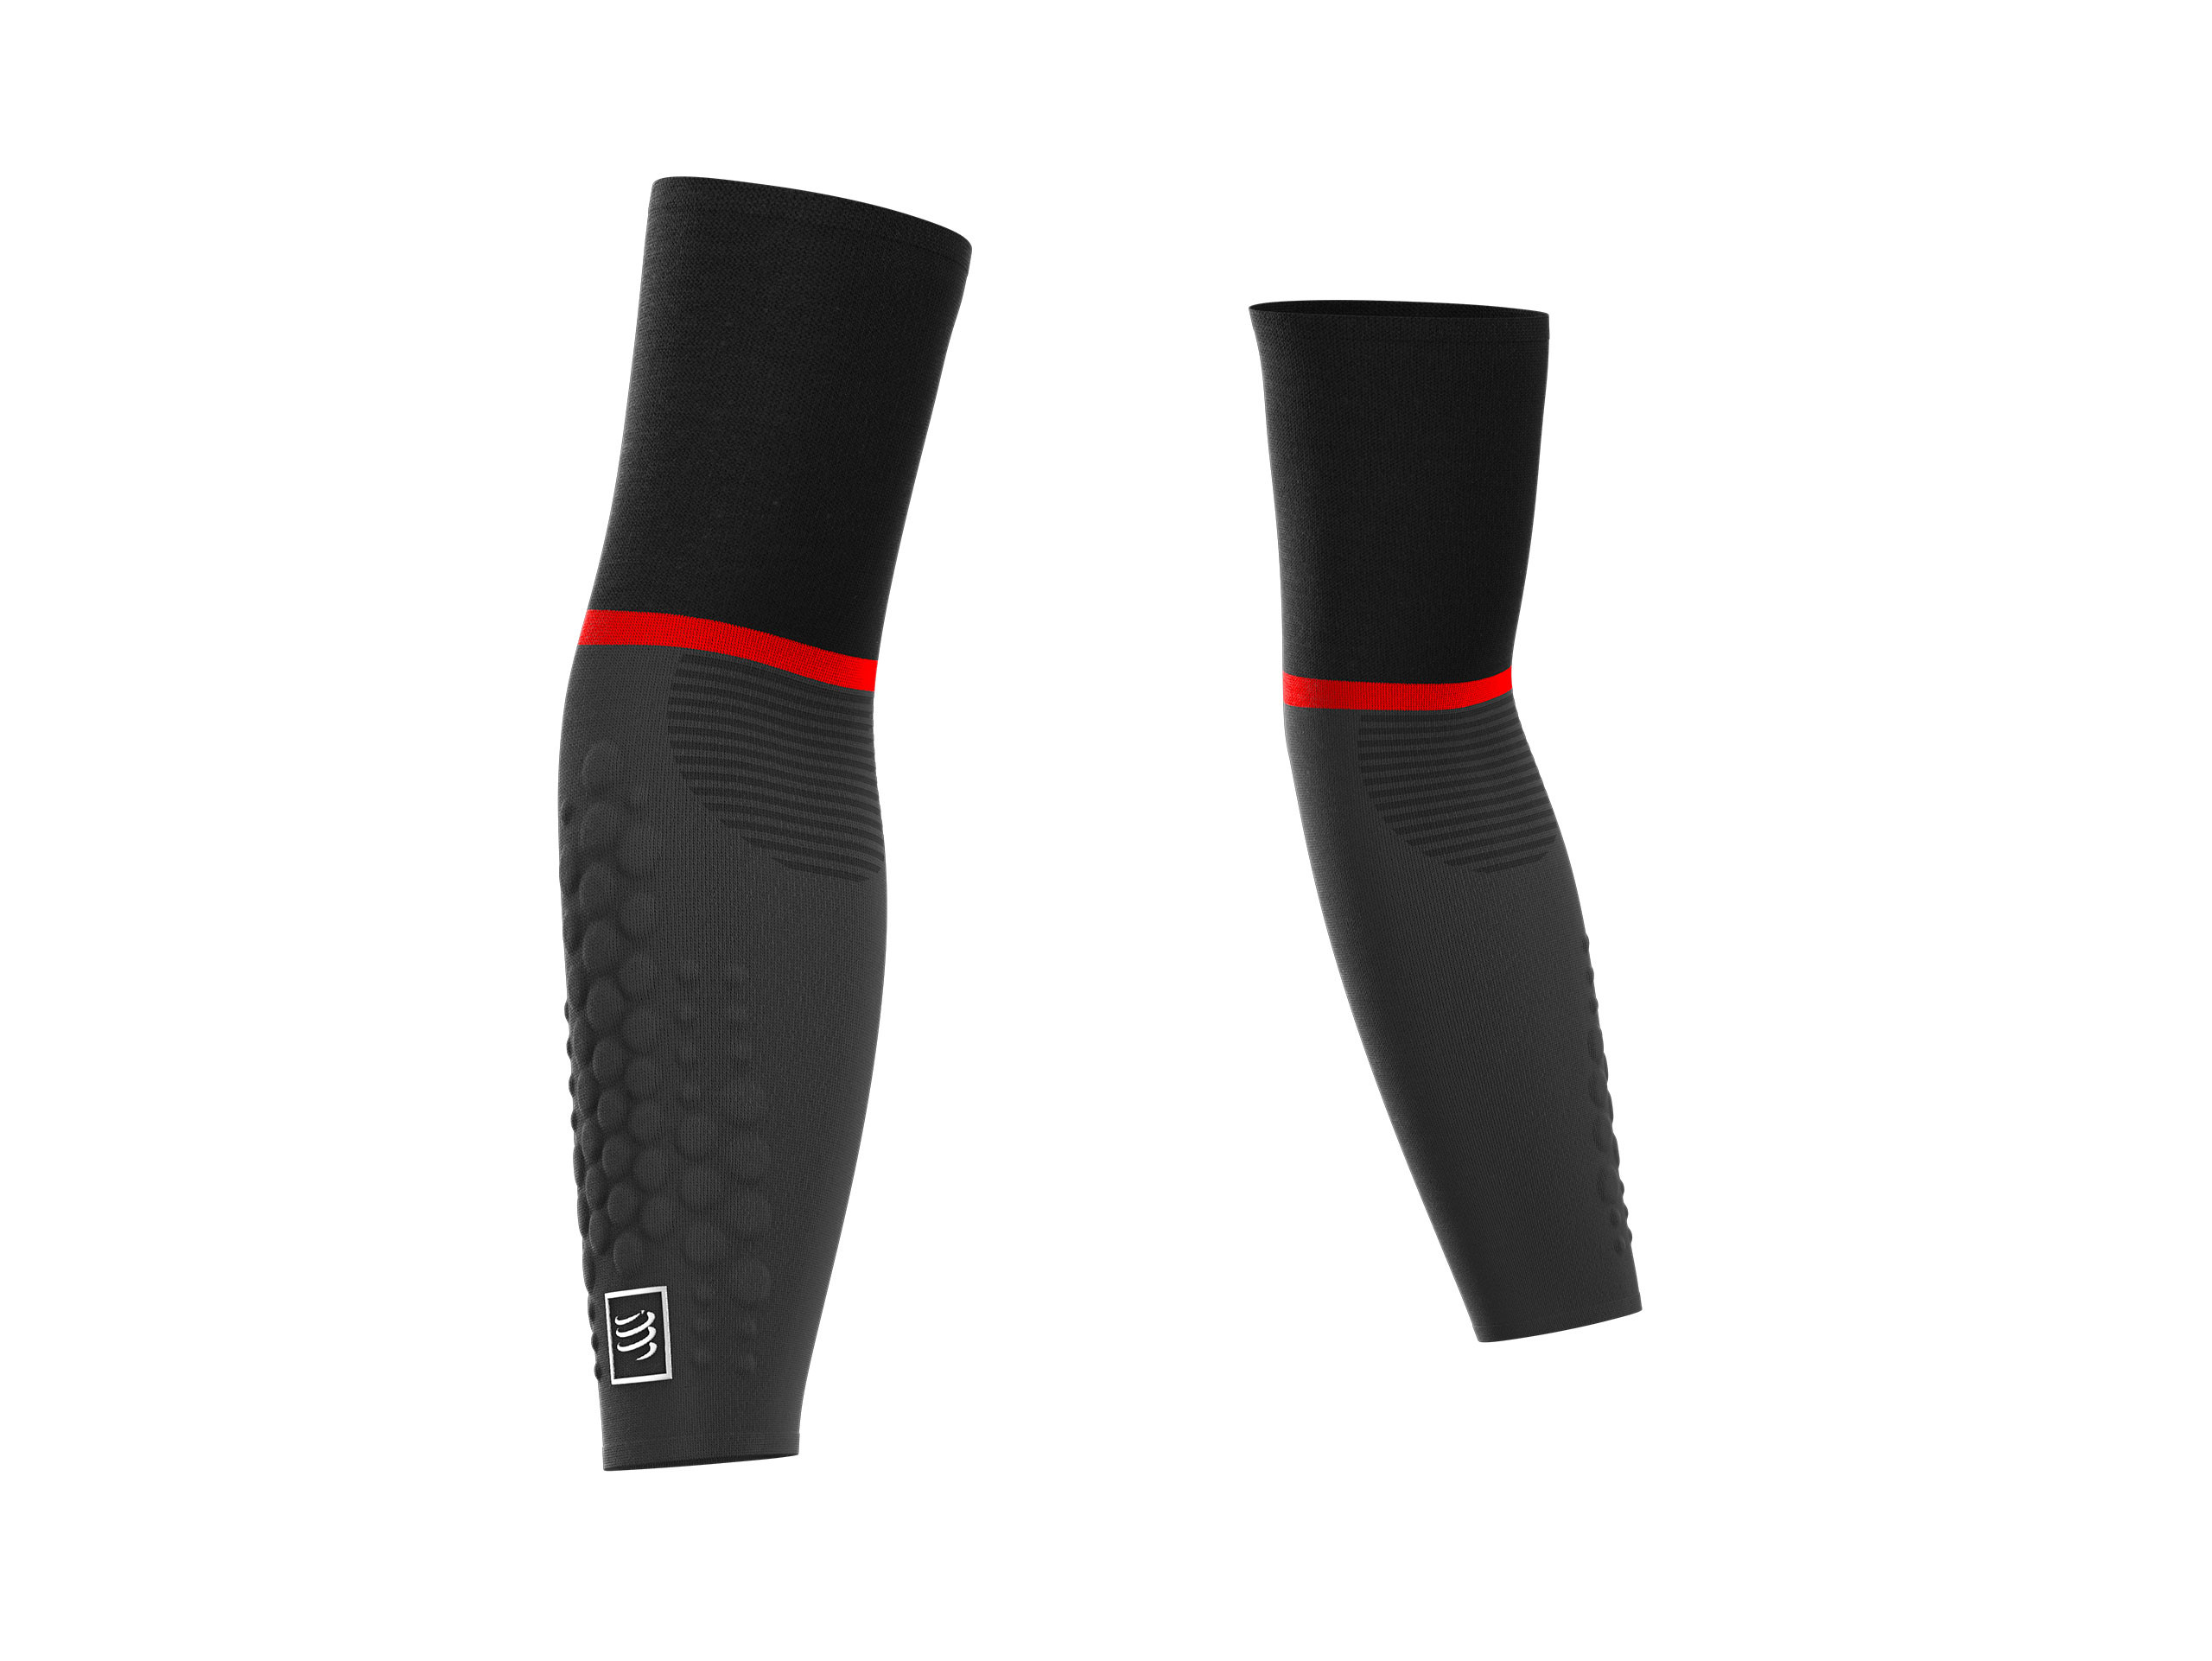 Compressport Arm Sleeves Size Chart